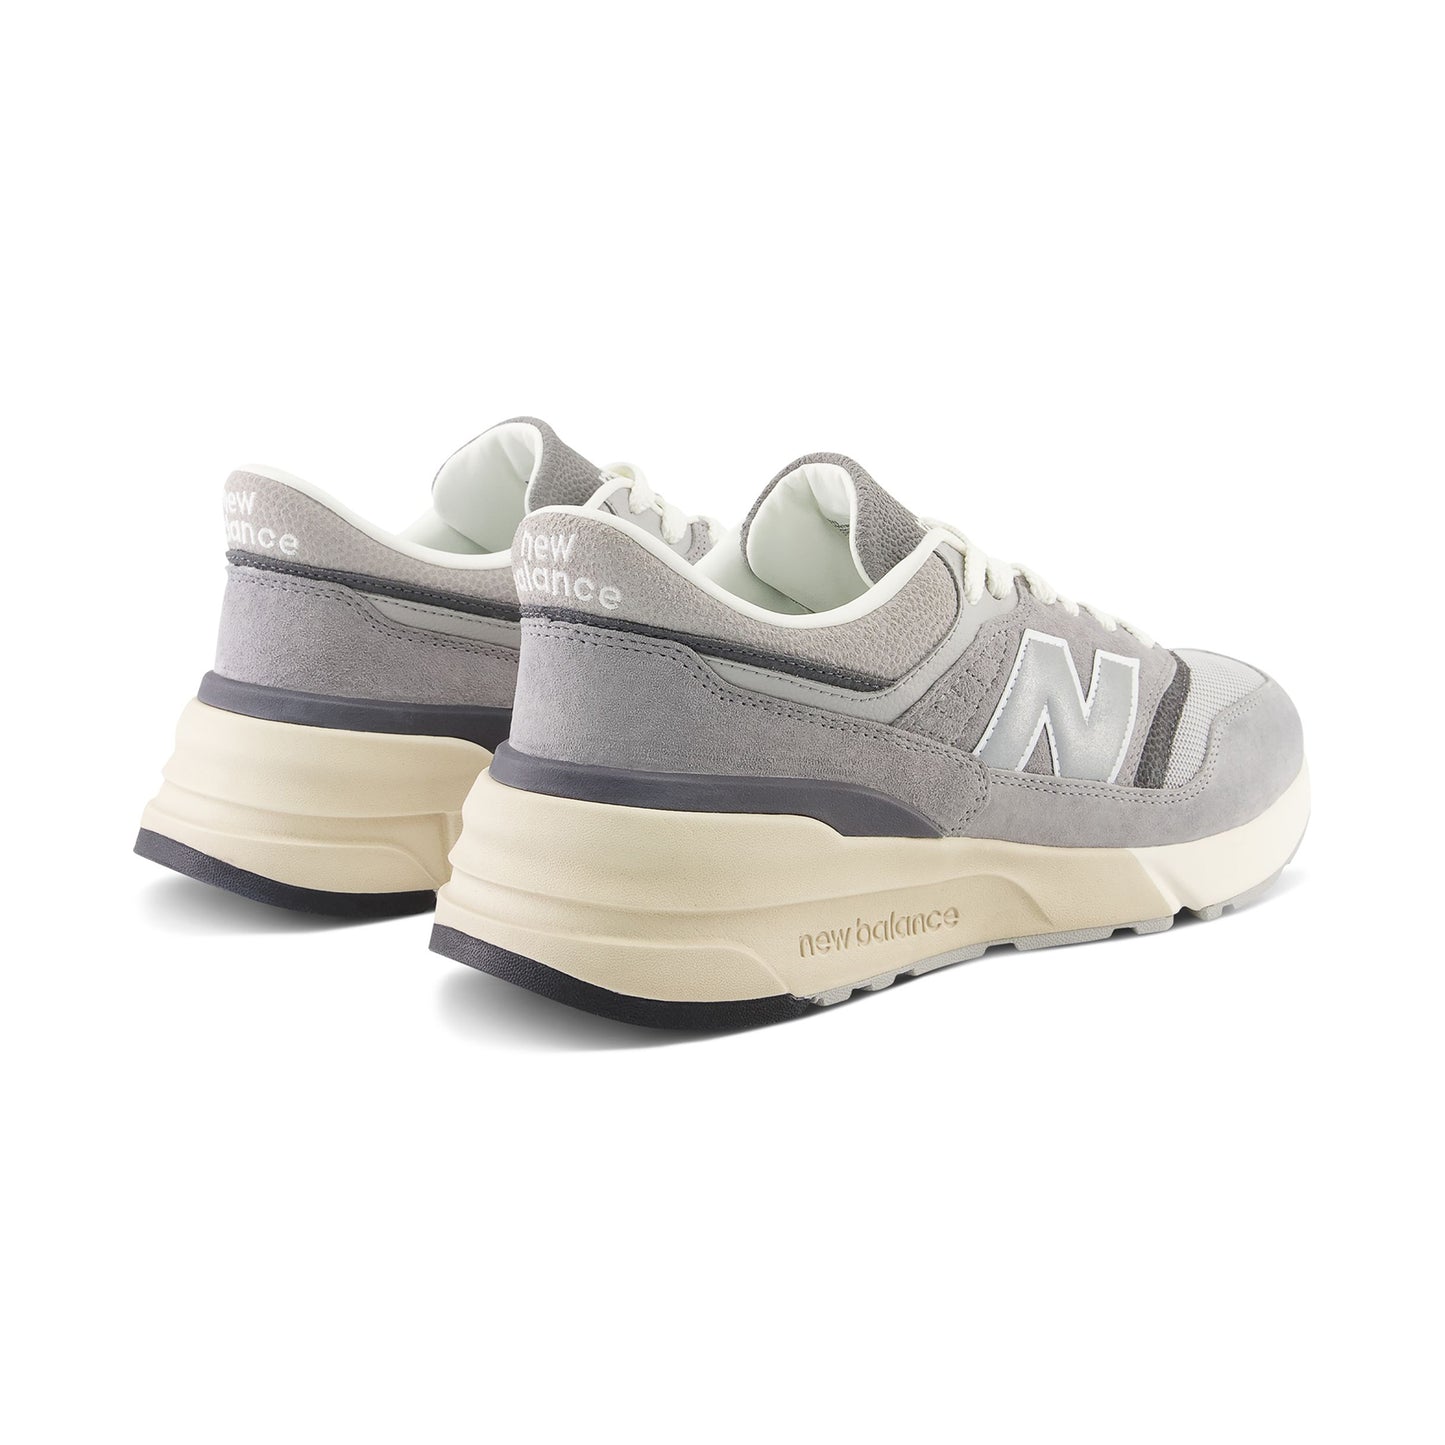 New Balance 997R Sneakers